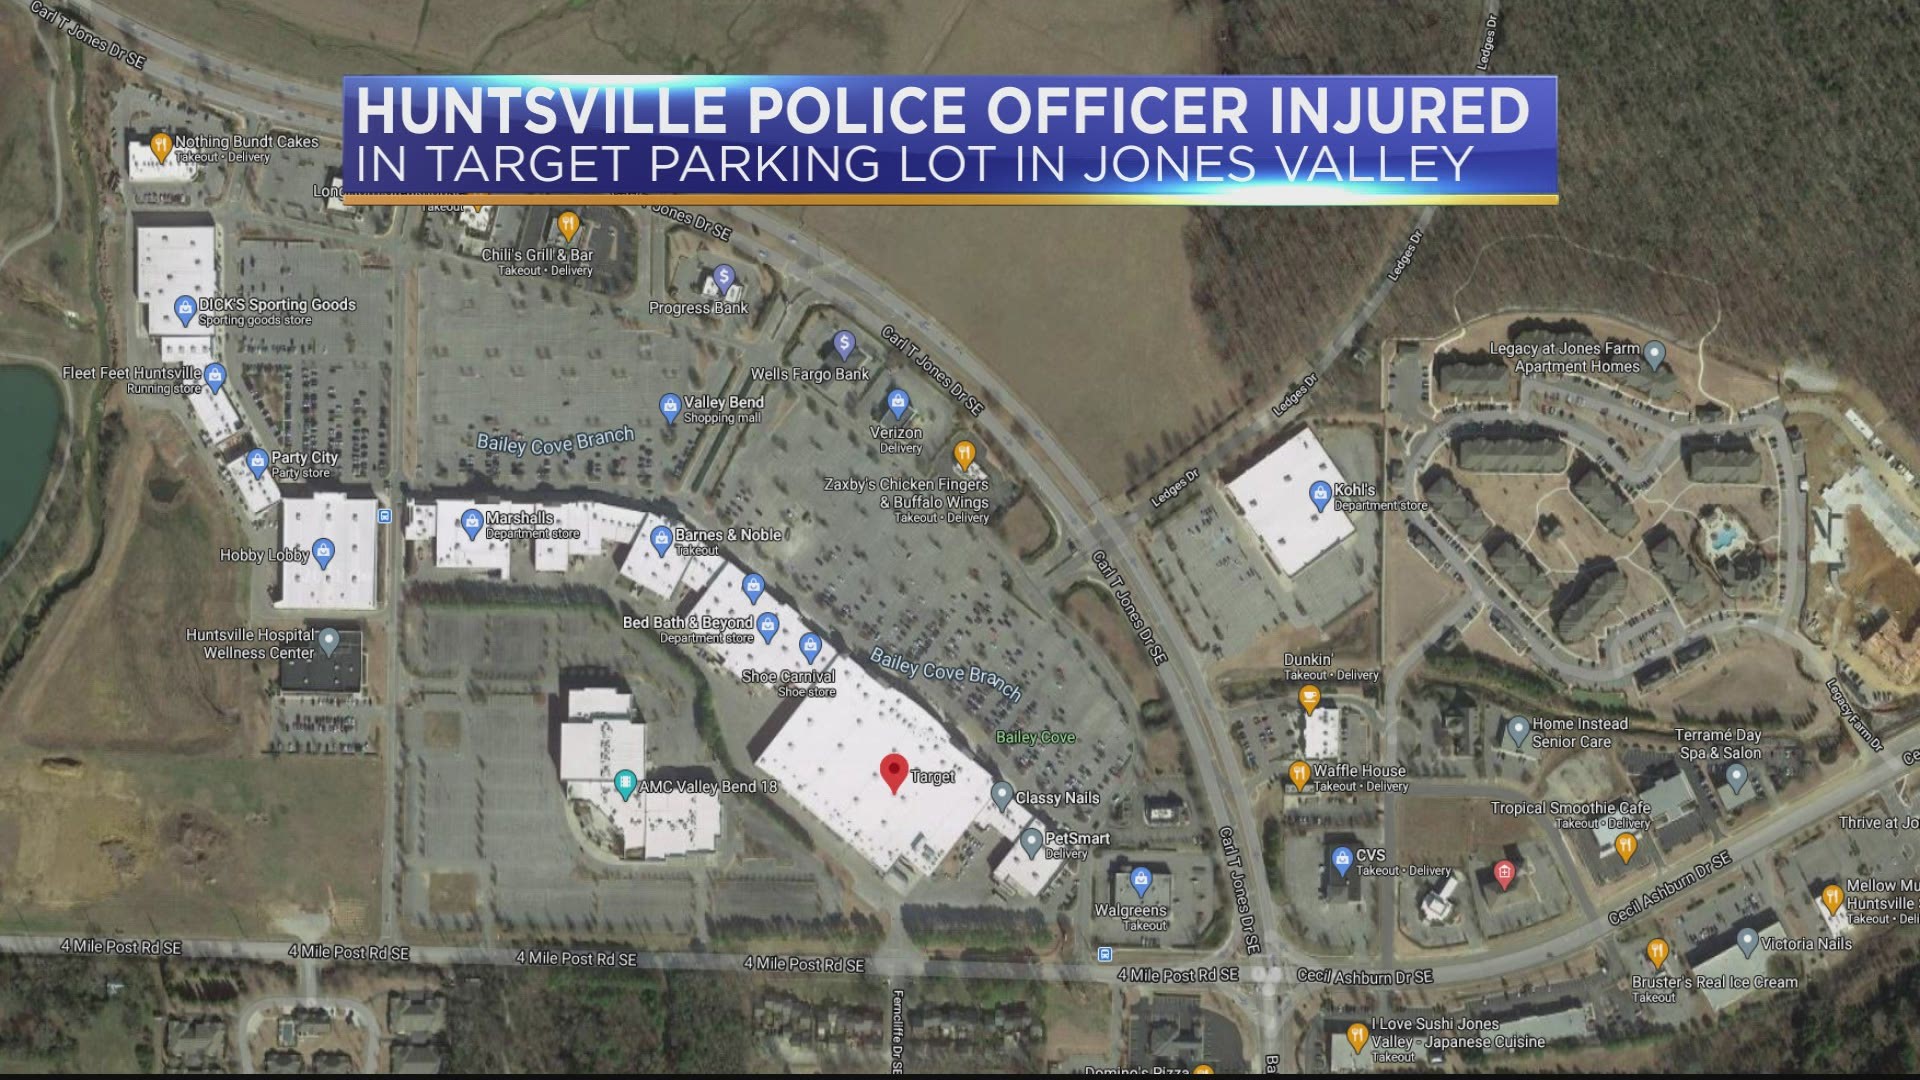 HEMSI was called just after 4:00 p.m. to the Target Parking lot on Carl T. Jones for an officer injured.